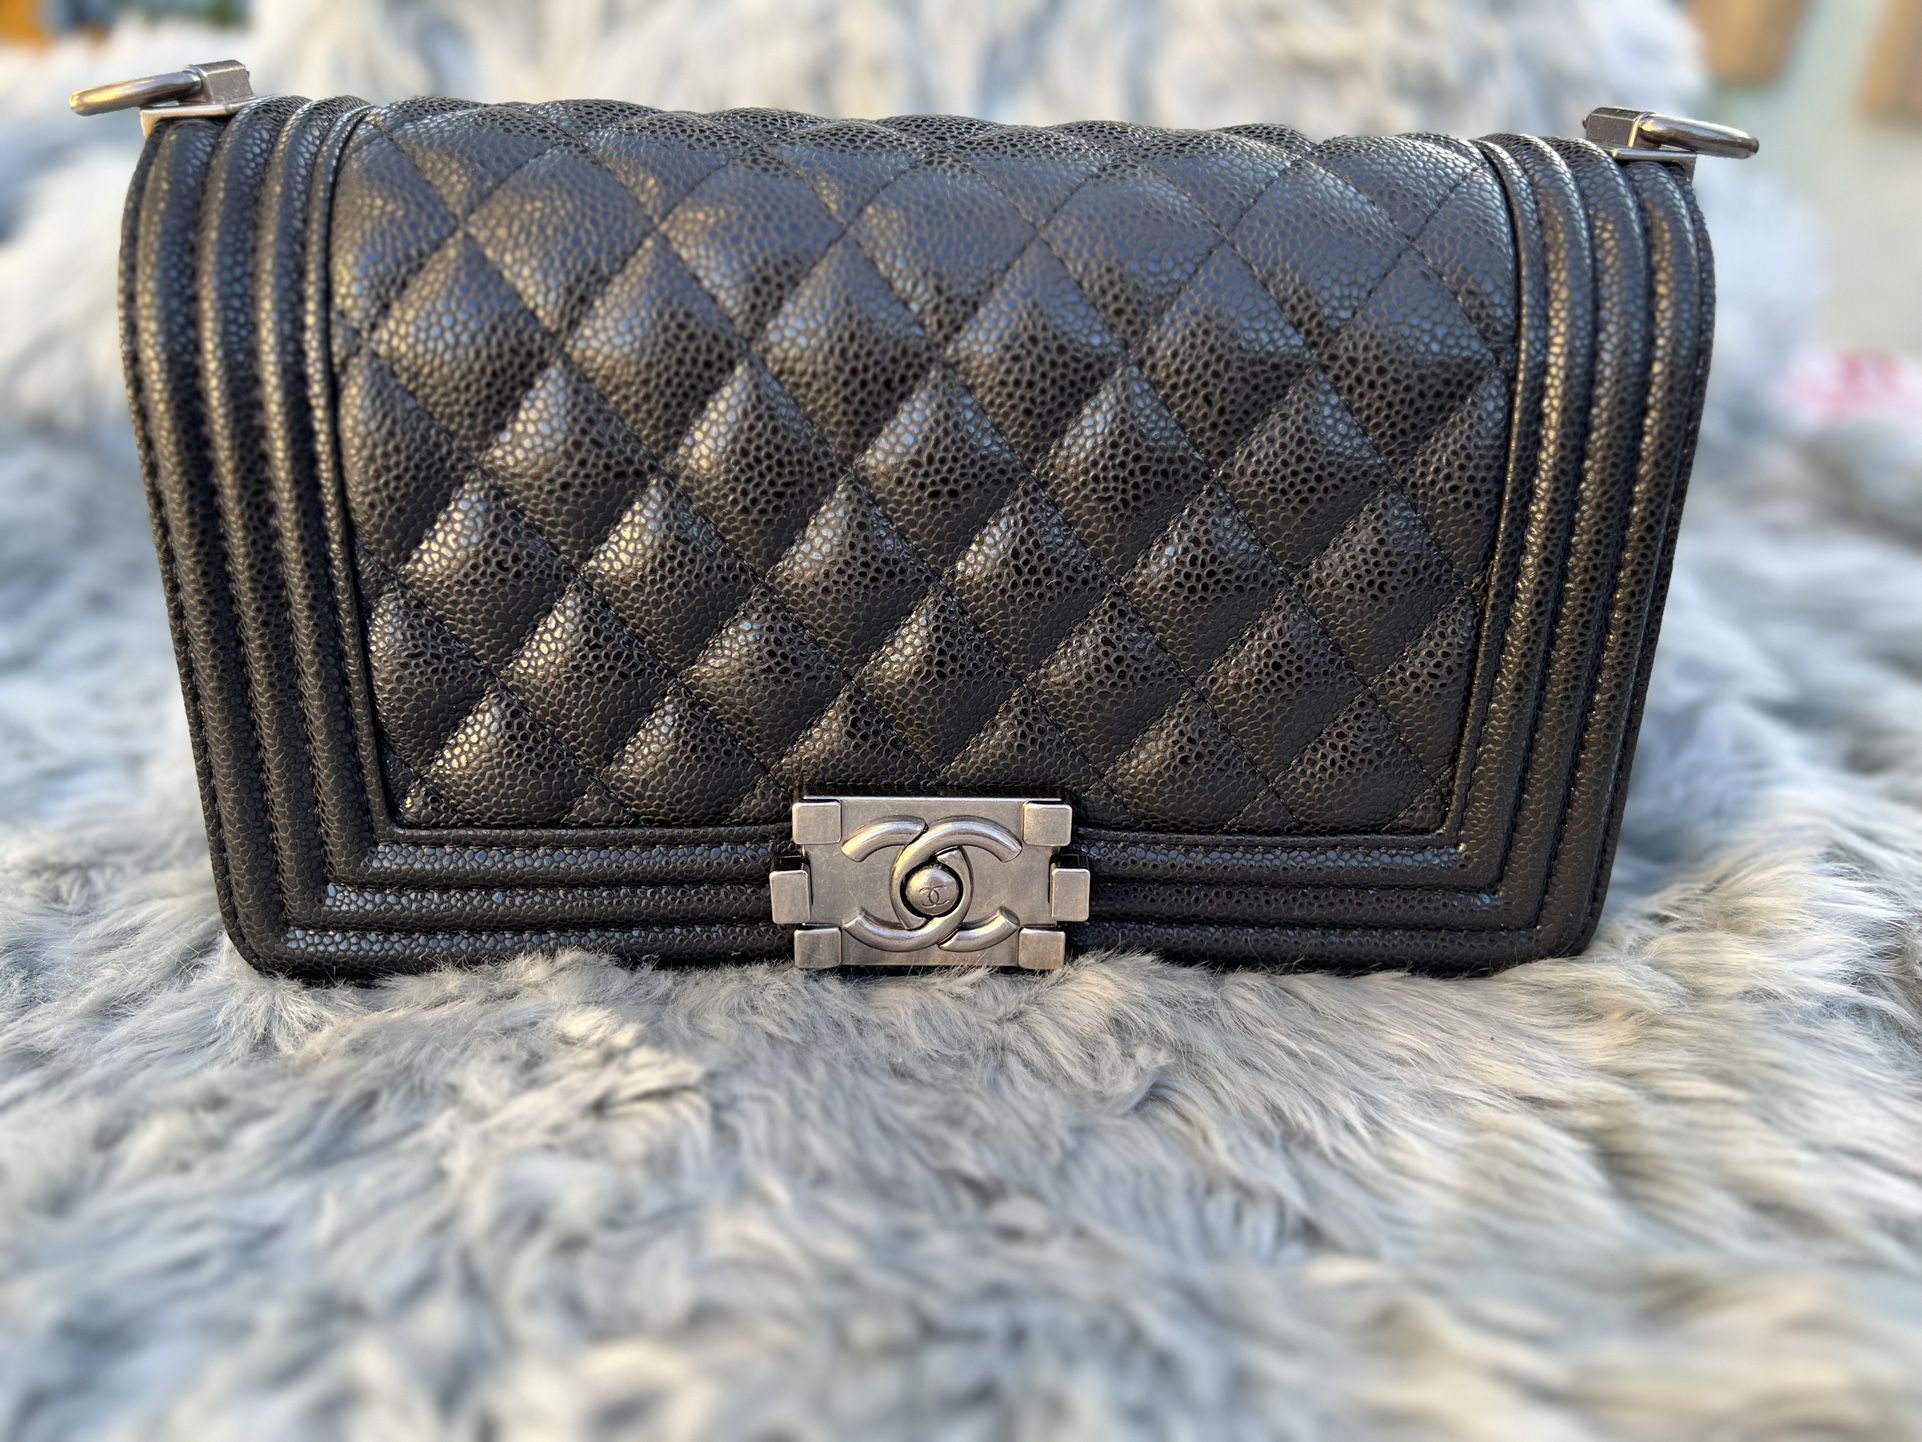 Chanel Shell Clam clutch/crossbody bag for Sale in Costa Mesa, CA - OfferUp